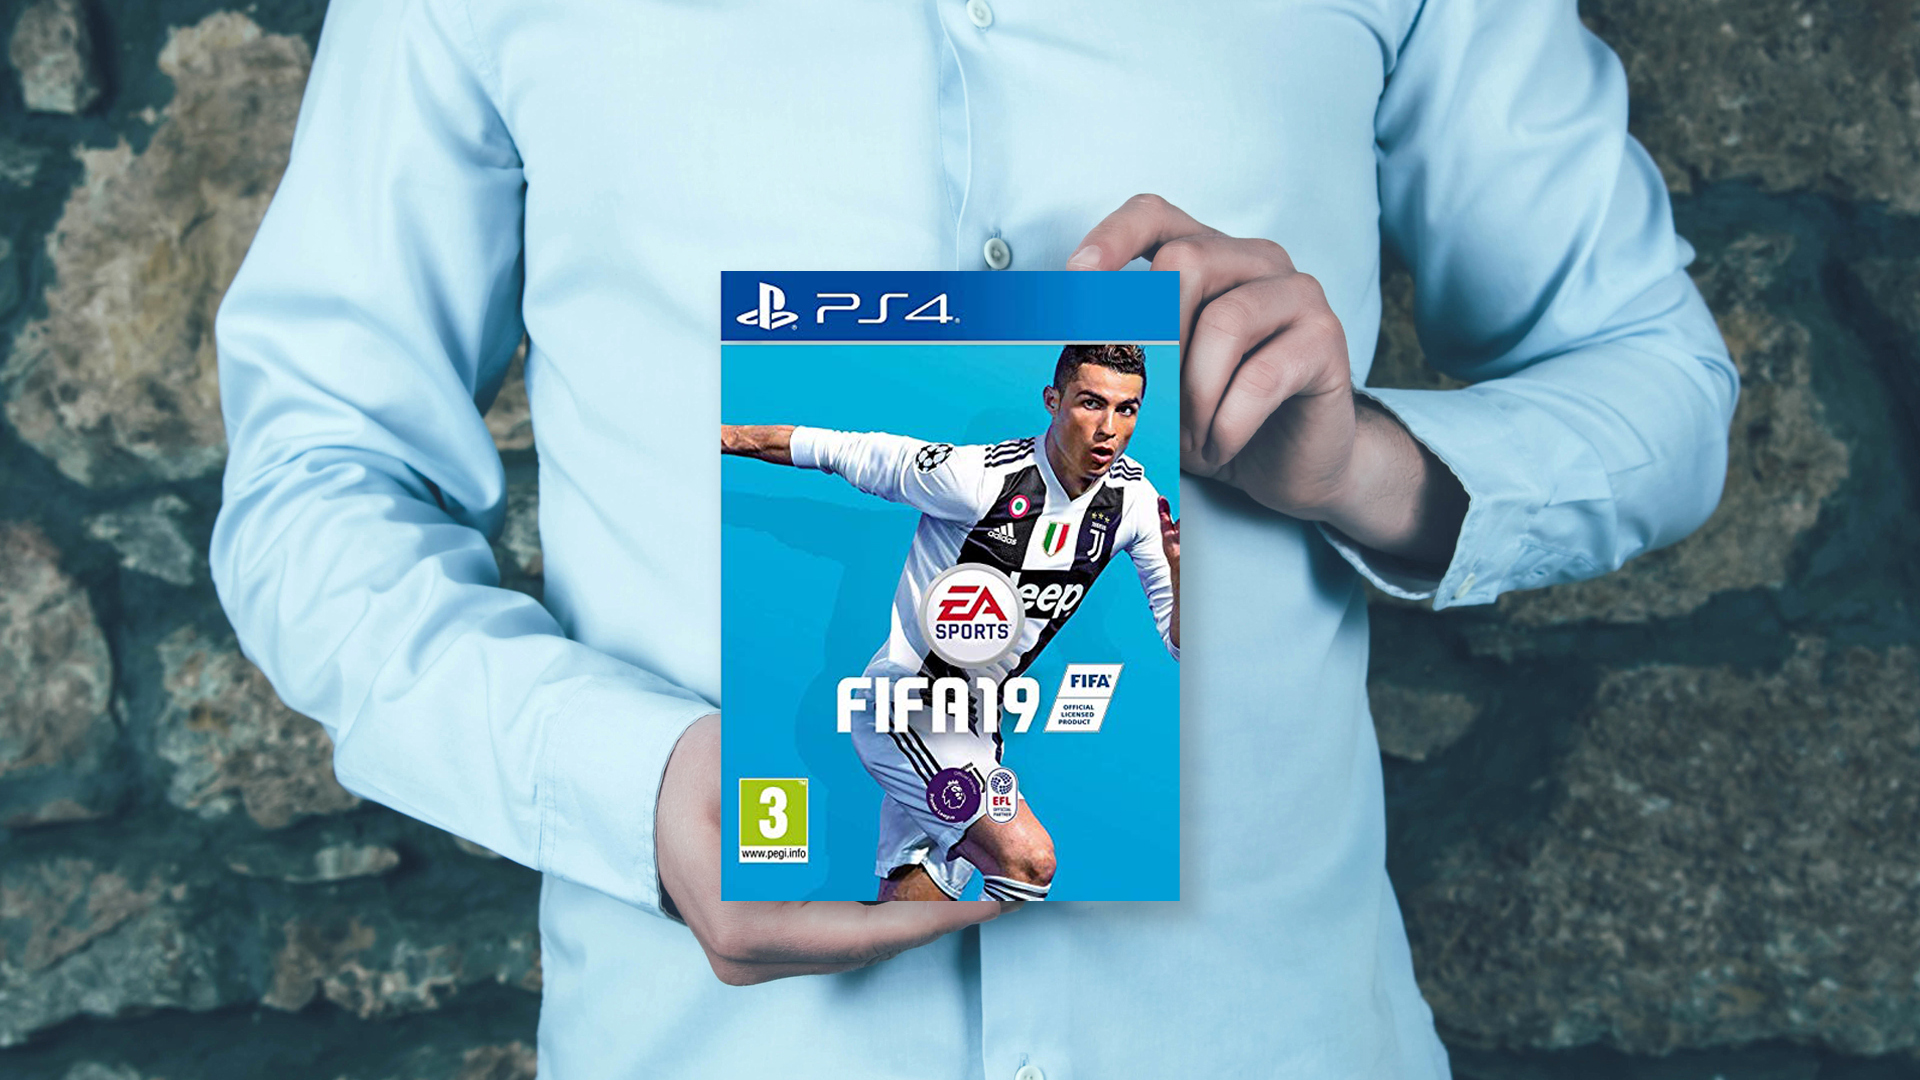 A person holding FIFA 19